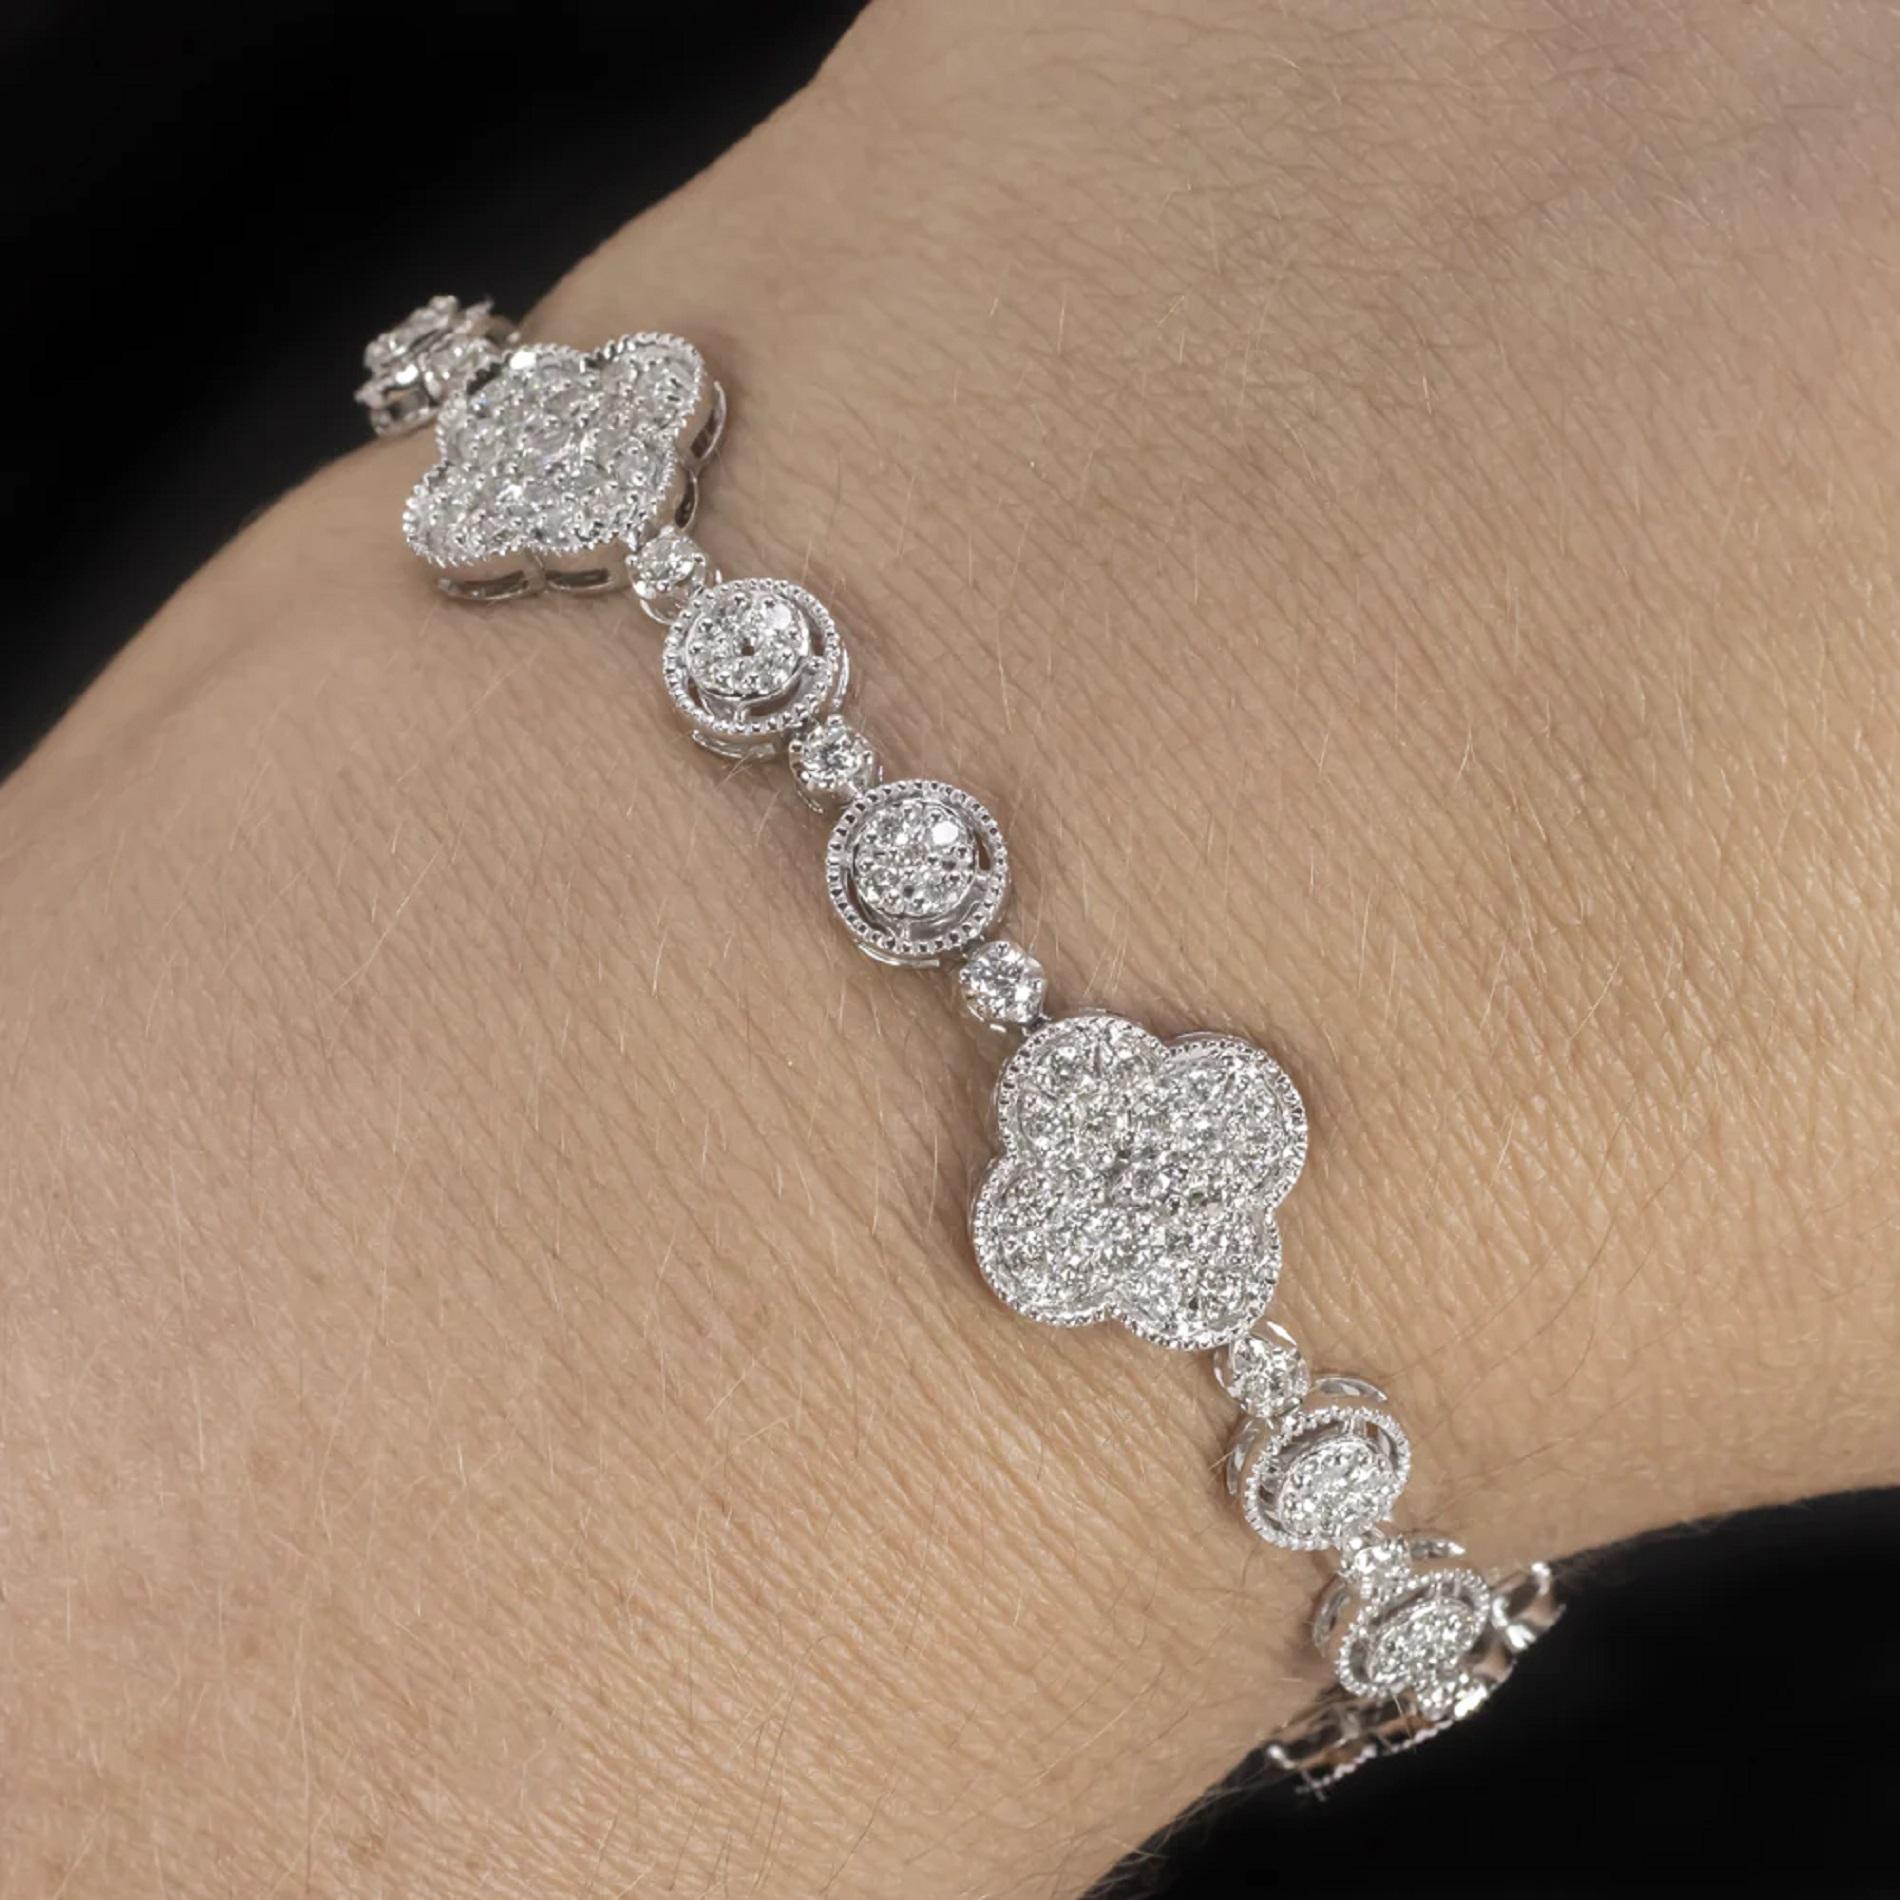 diamond bracelet has a stunning, large and glamorous look! The face is made up of round and clover shape clusters, and the lariat design clasp creates an elegant, dangling tassle

Highlights:

- 3.5 carats of bright white and eye clean diamonds

-